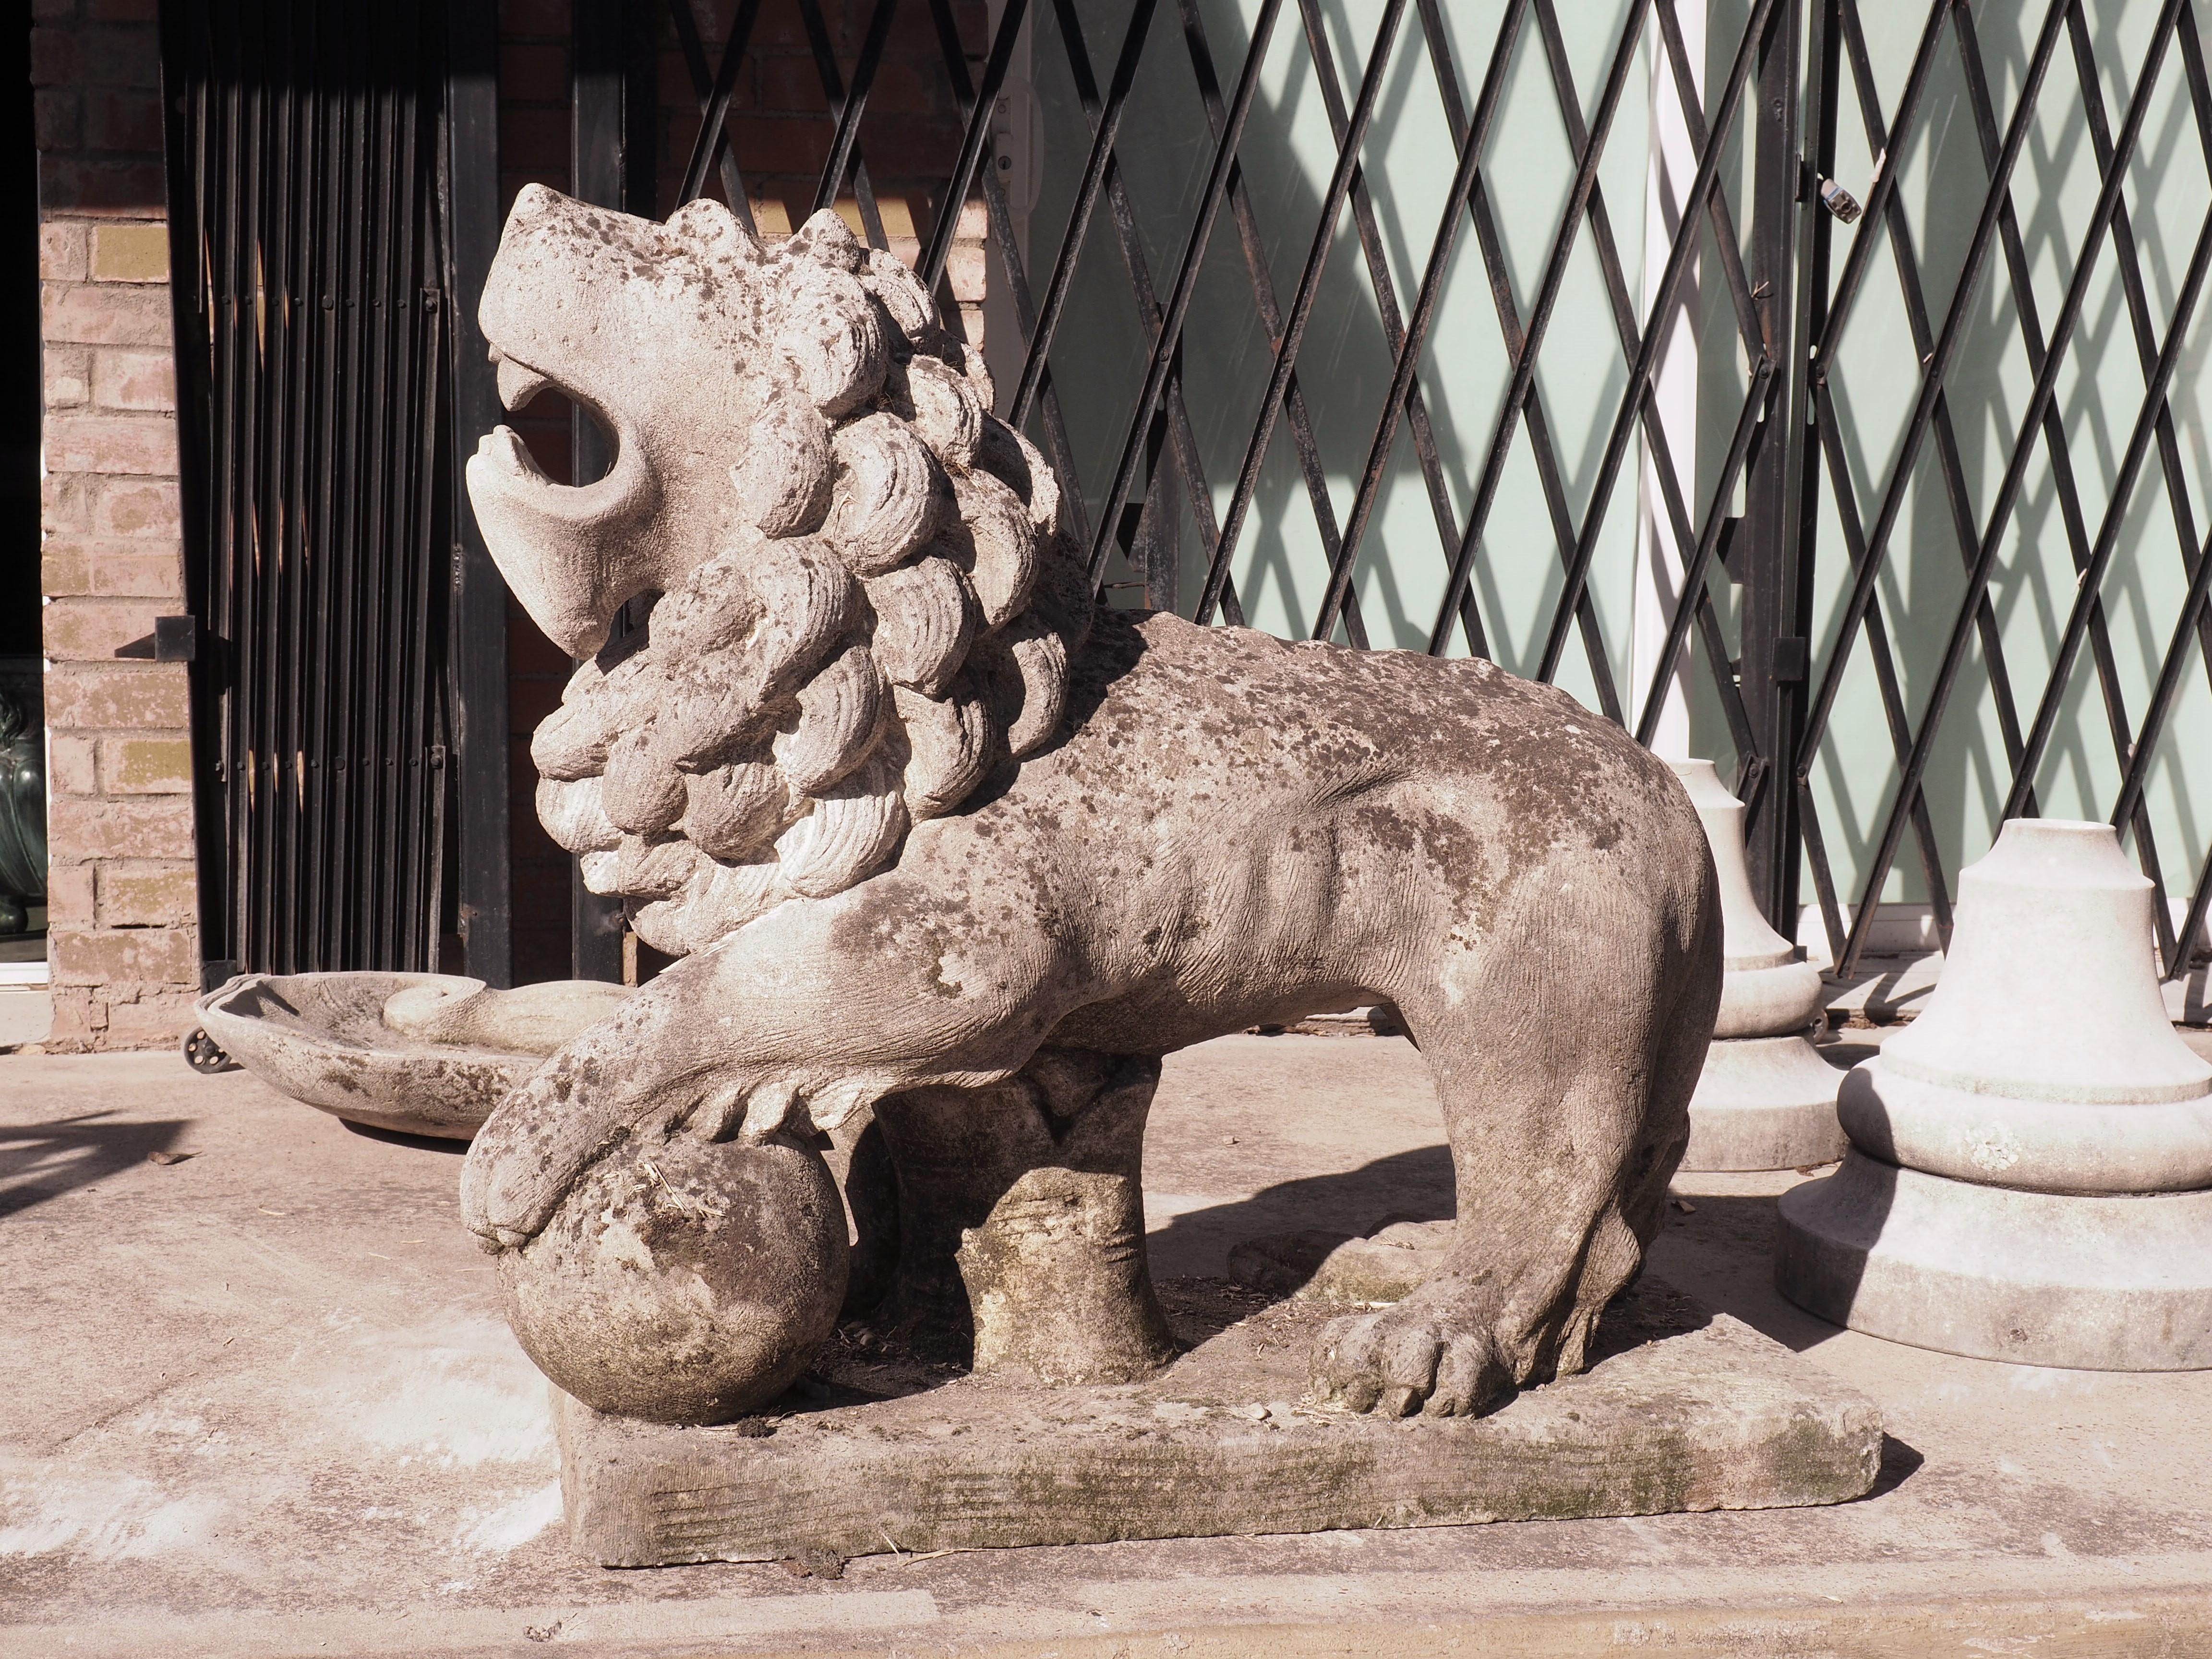 This handsome version of the Medici Lion with his paw on a ball has been carved out of Vicenza limestone, which is found in the Veneto region of Italy. In the 16th century, Ferdinando I de’ Medici requested that two lions be carved for his garden